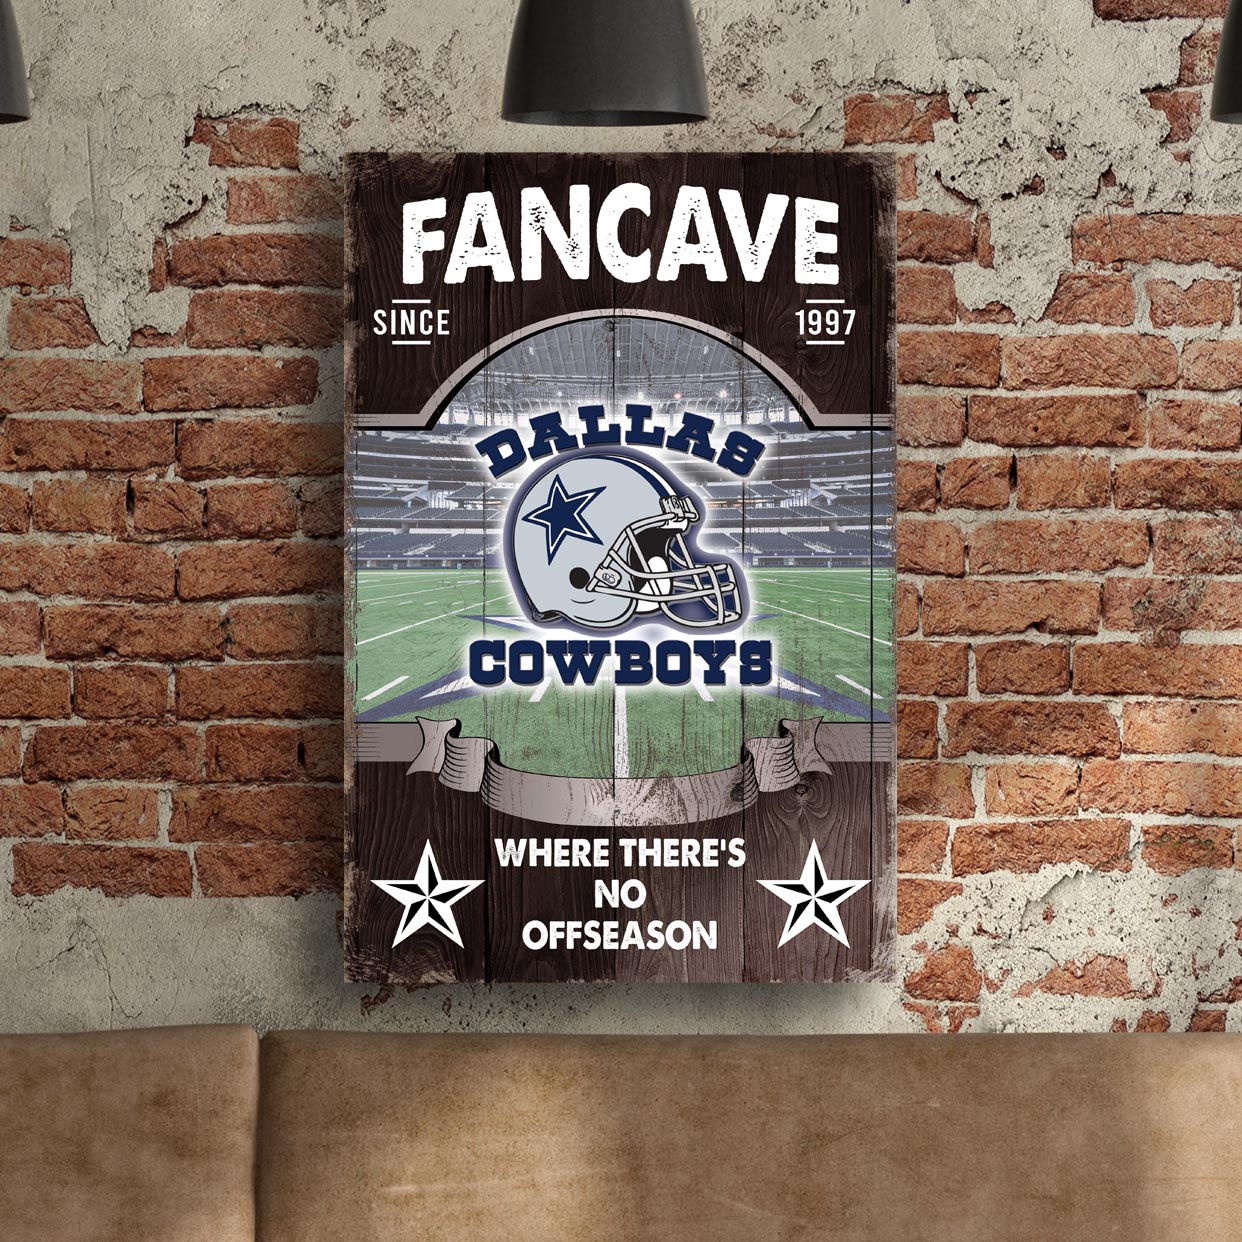 Cowboys Fan Cave Sign - Image by Tailored Canvases